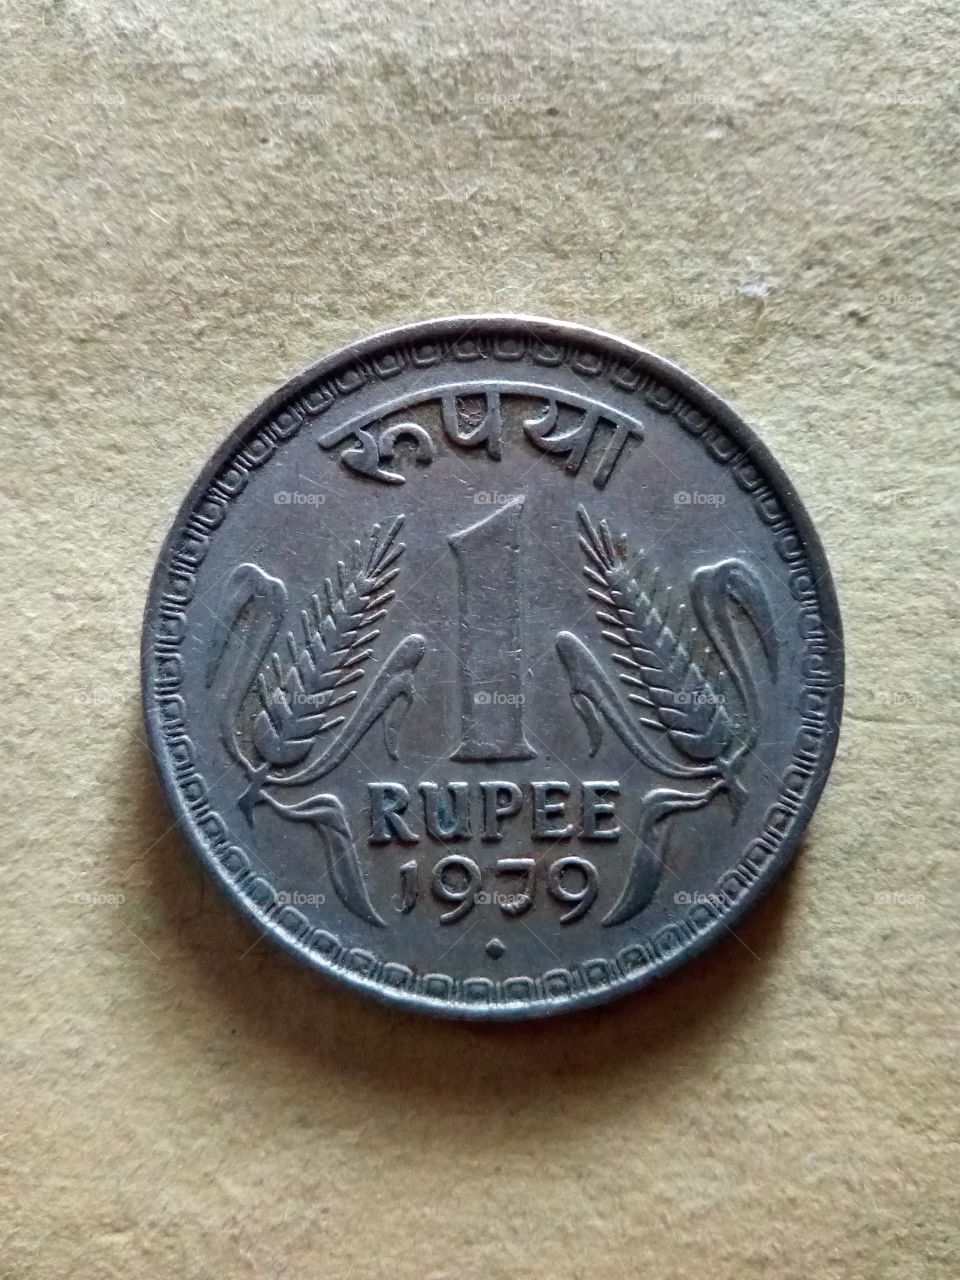 Old Indian 1 Rupee issued in 1979 by Government of India.